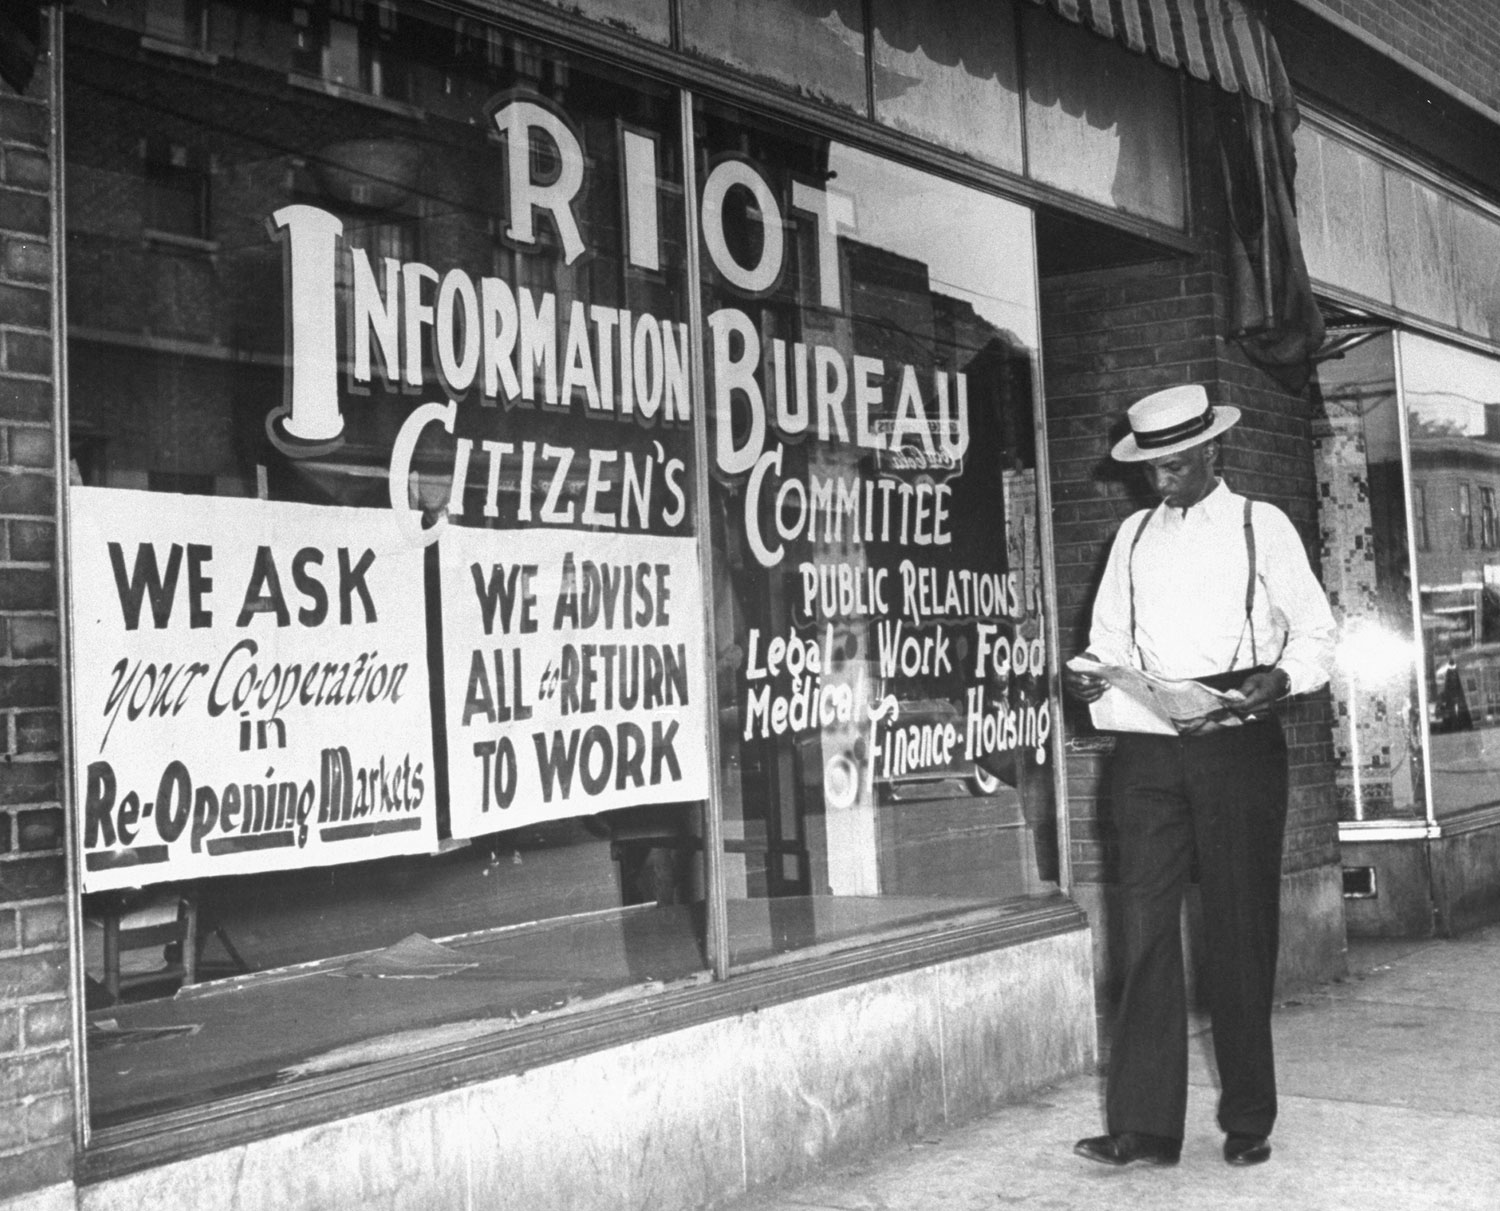 Not published in LIFE. The Hastings Street Riot Information Bureau Citizens Committee, created by African Americans using a vacant storefront after wartime race riots swept Detroit, June 1943.